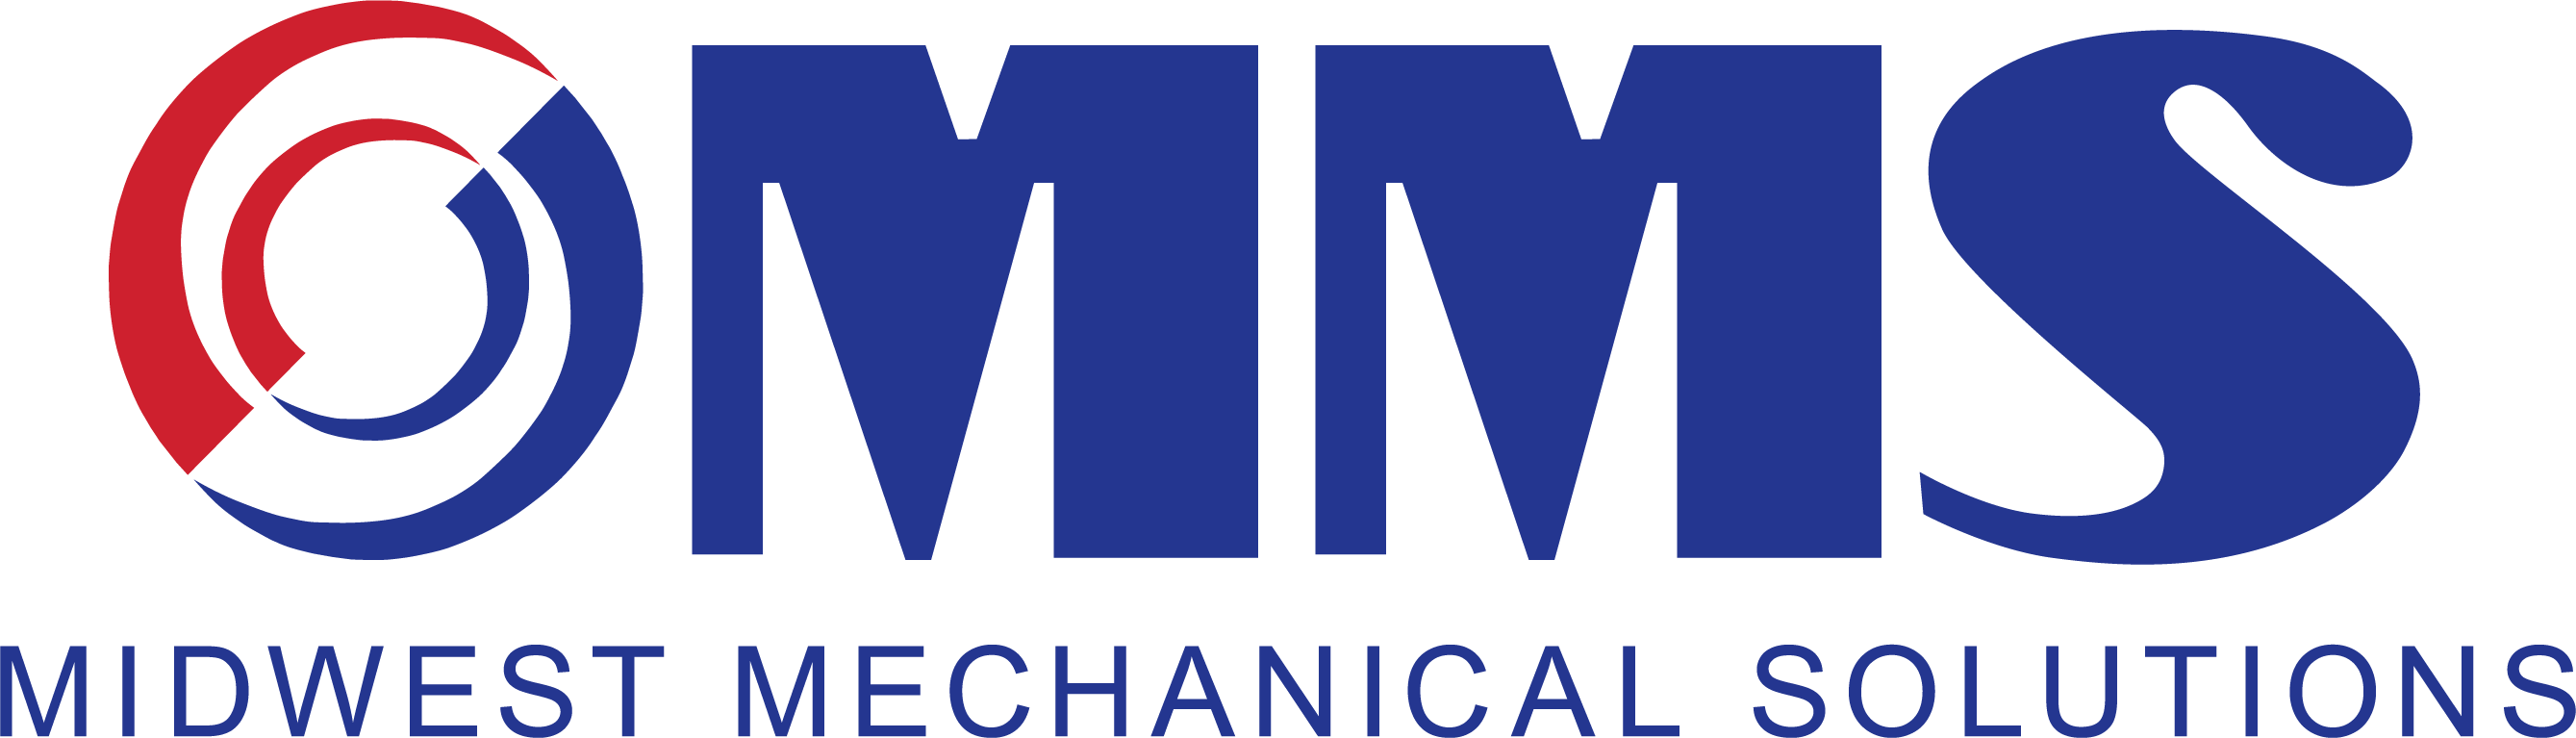 Midwest Mechanical Solutions Company Logo